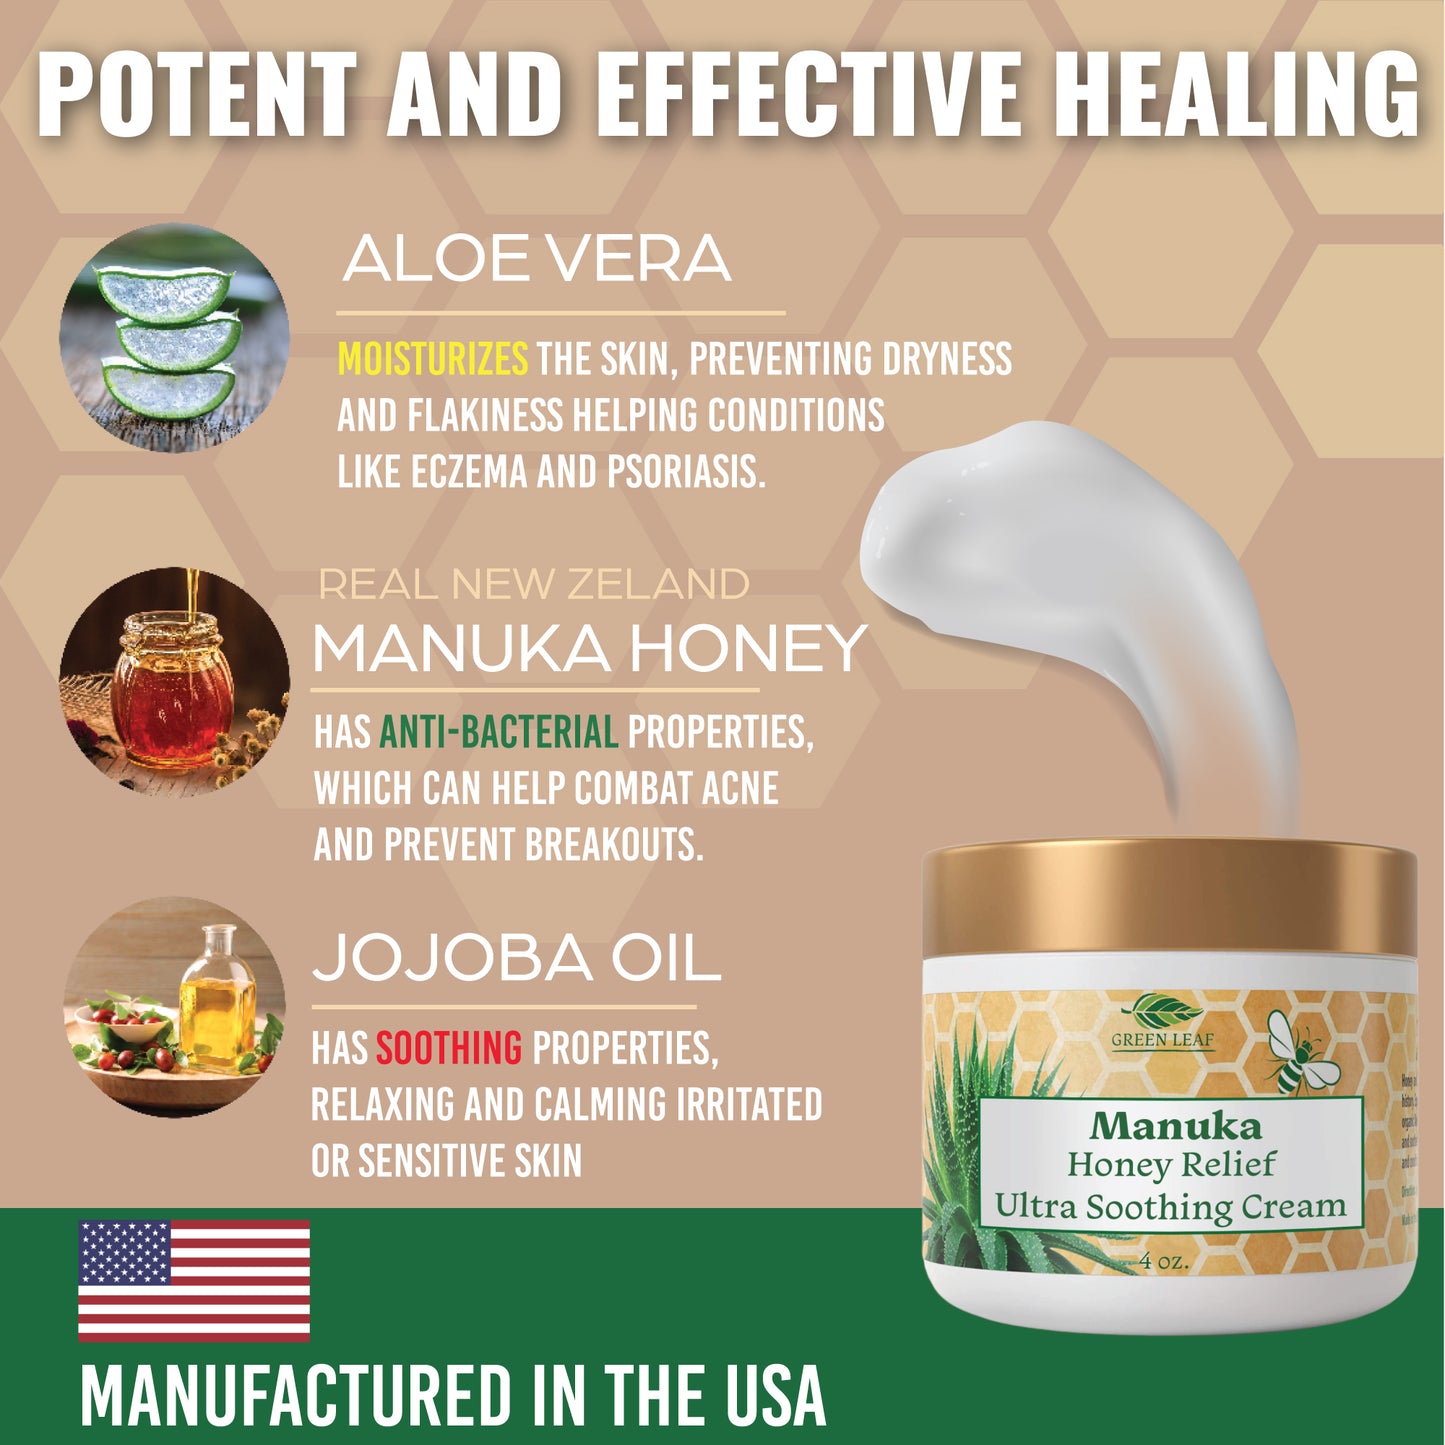 Manuka Honey Cream - Eczema Honey Cream Moisturizer Lotion Treatment for Ezcema & Psoriasis - Ultra Soothing Relief - Face & Body Care, Itchy, Dry Skin Rash Healing Ointment - For Adults & Kids